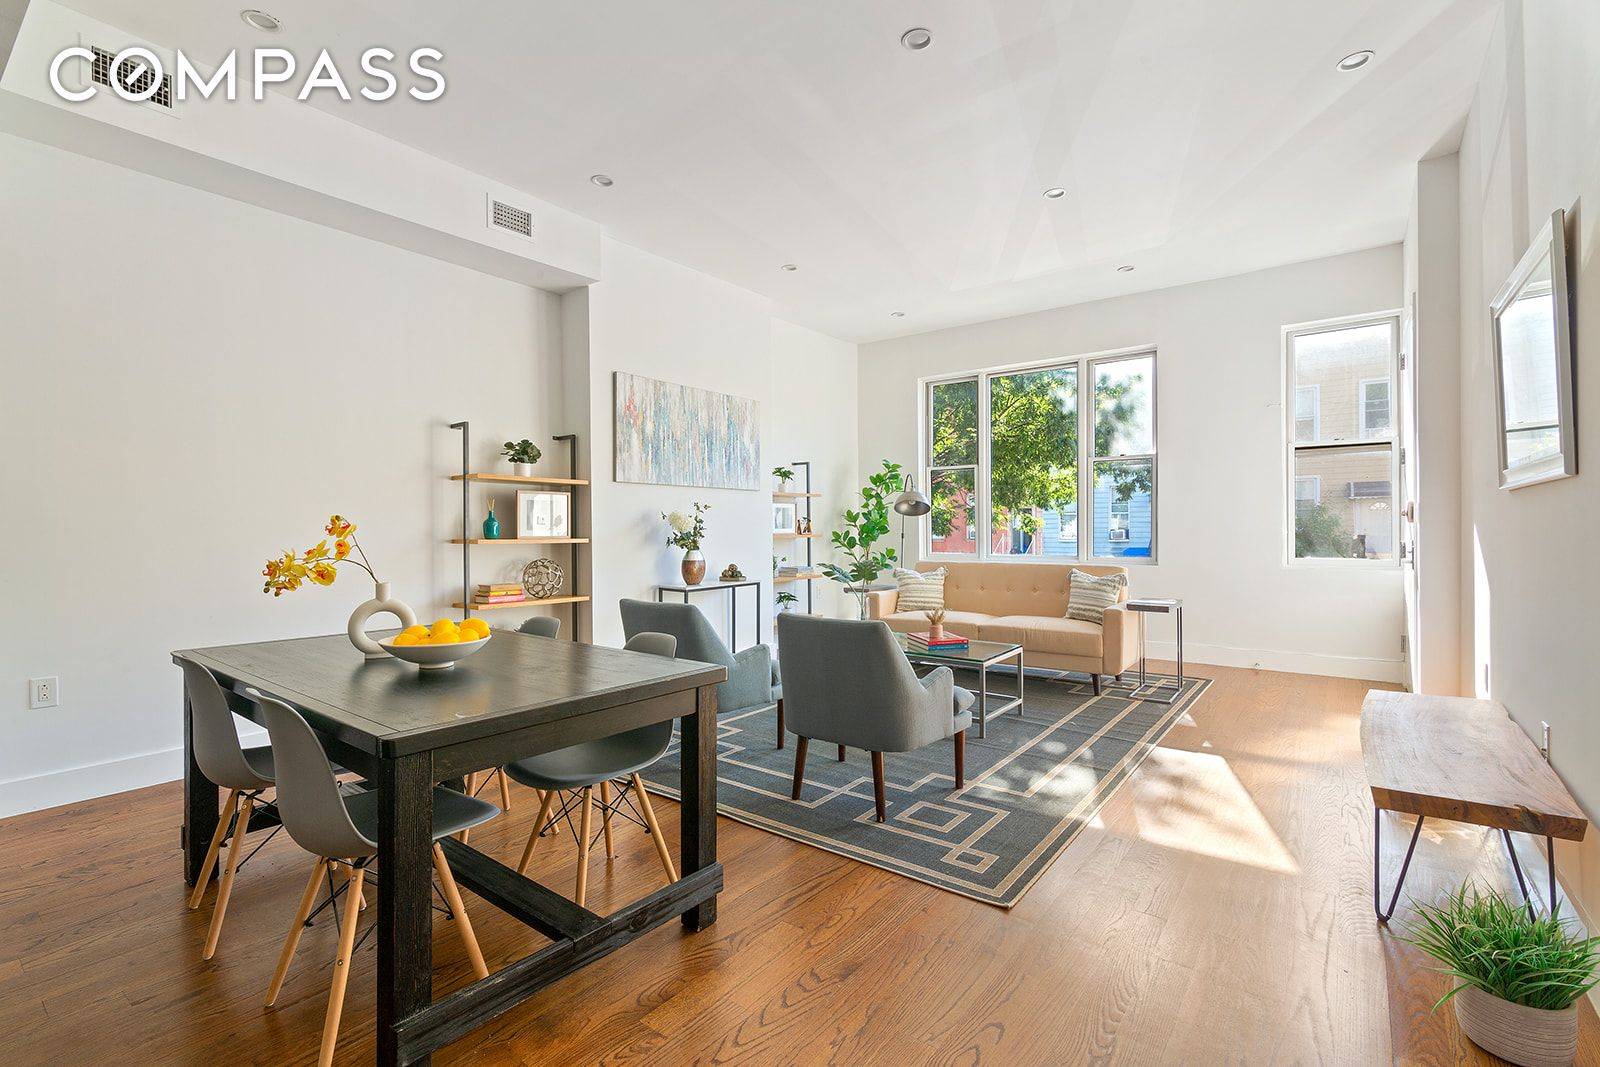 Located in the heart of Bushwick, this updated brick two family shines with move in ready interiors and fantastic outdoor space.